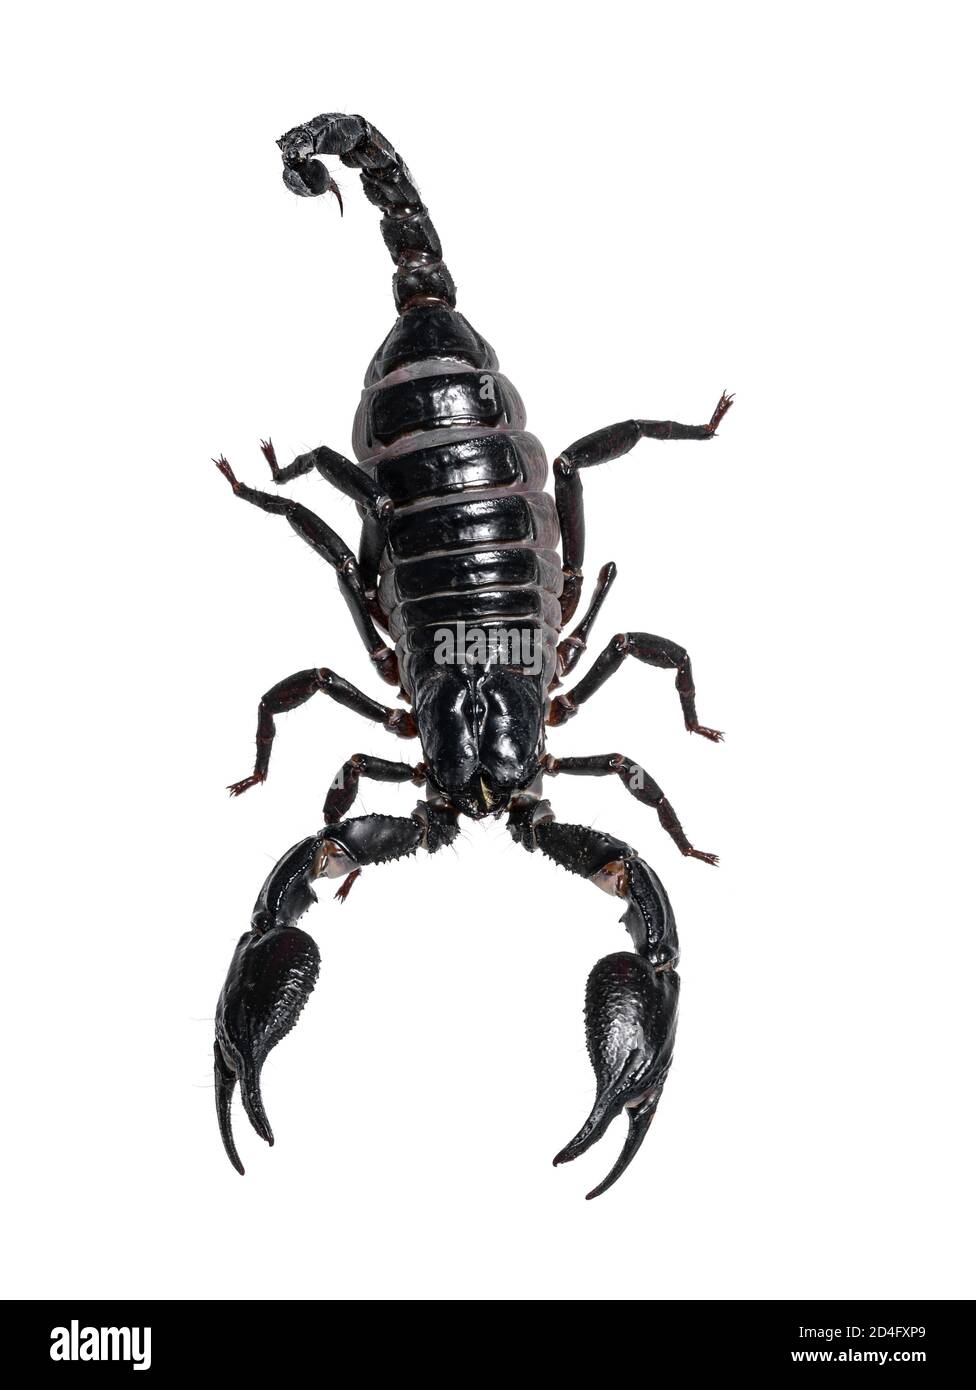 Top view of Asian Forest Scorpion aka Heterometrus Petersii. Isolated on white background. Stock Photo